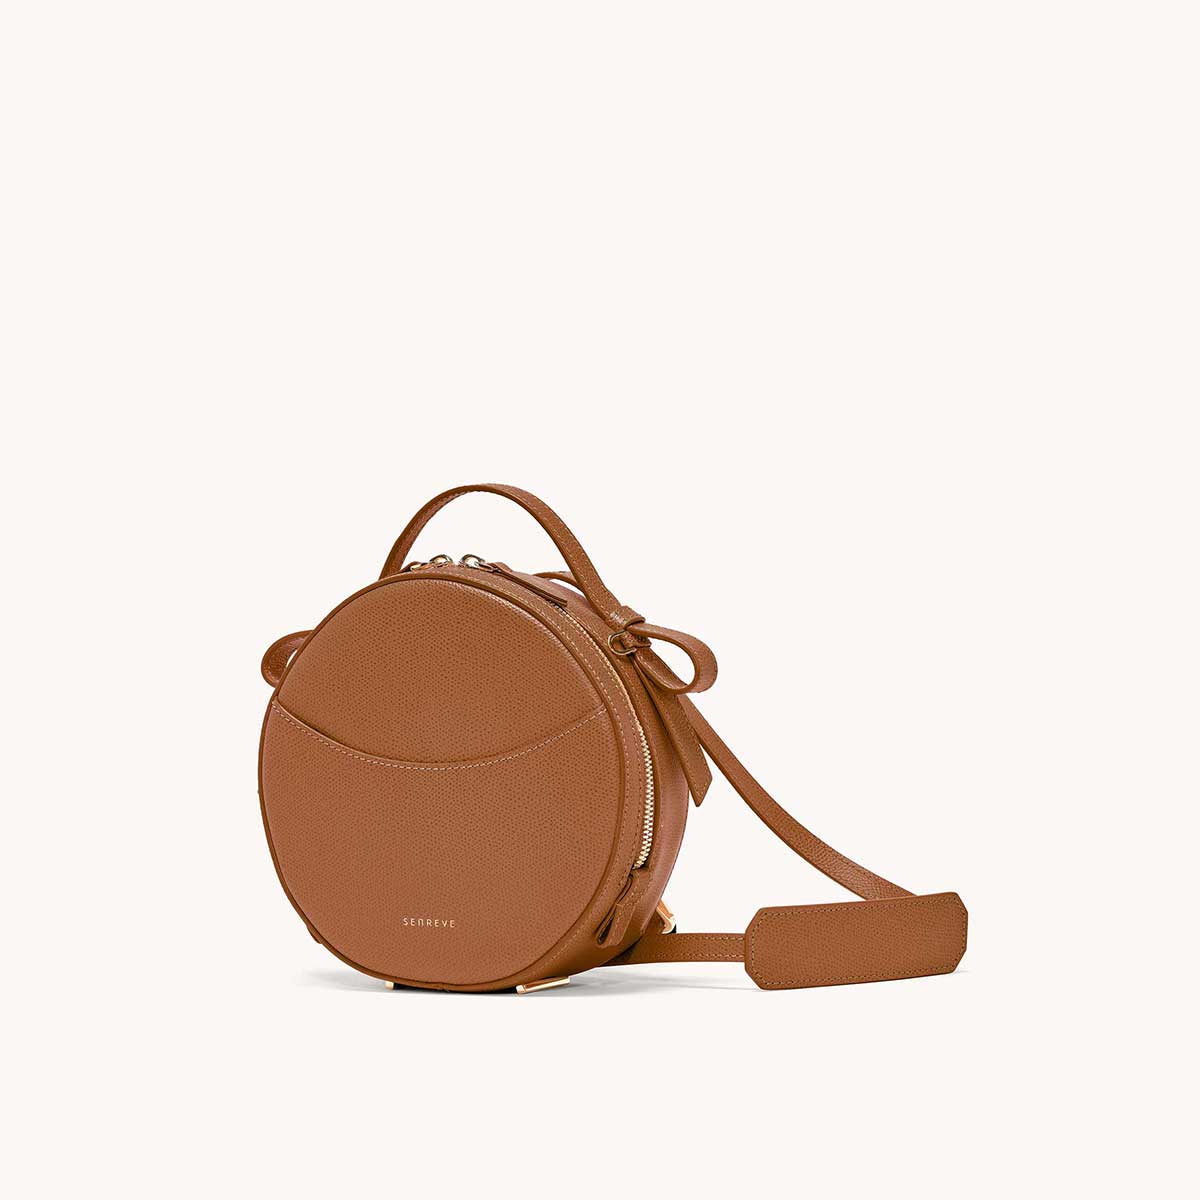 circa bag pebbled chestnut side view with leather strap